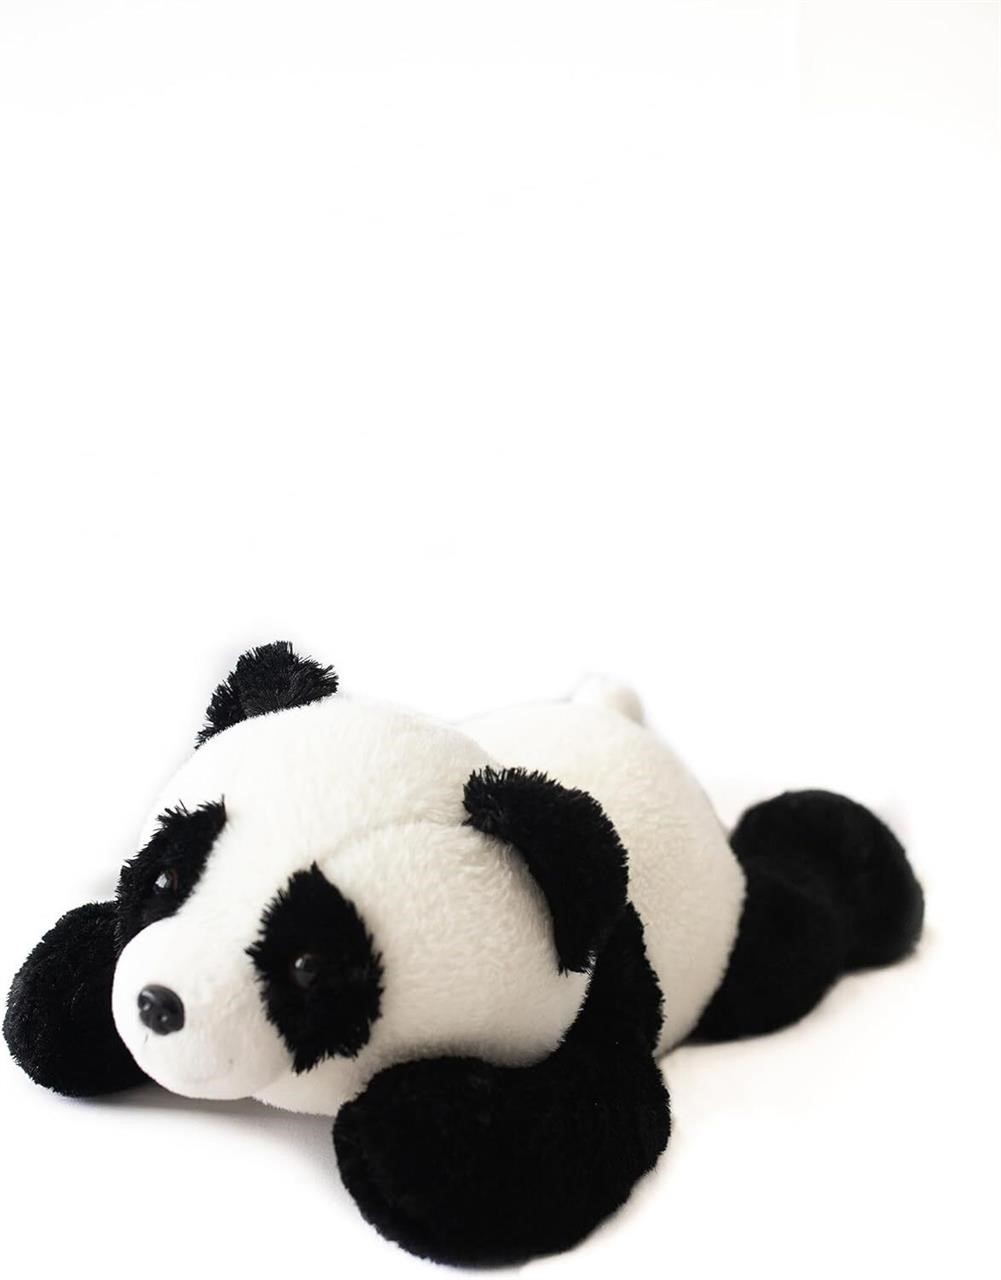 10 lbs Weighted Stuffed Panda for Adults  Comfort